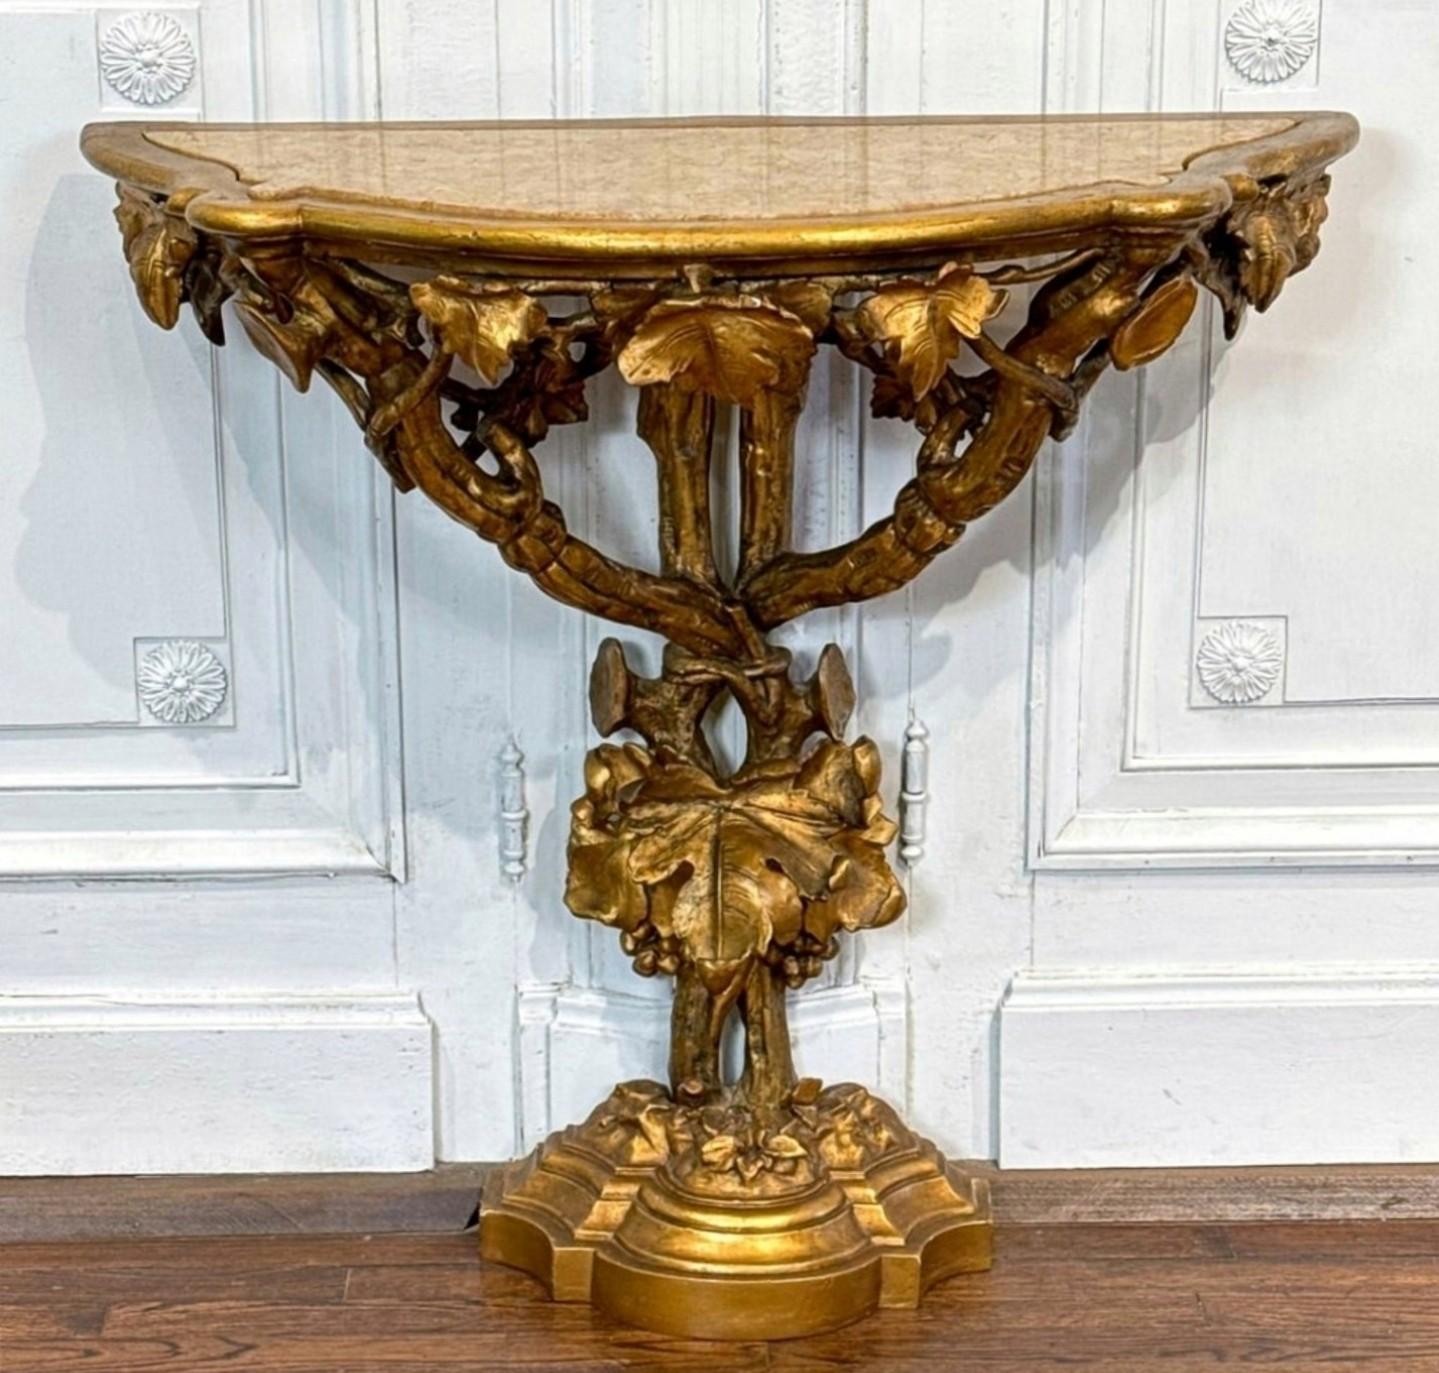 A stunning Italian Baroque elaborately carved gilt wood marble top console table, circa 1870.

Italy, late 19th century, hand-crafted in opulent and luxurious Rococo Revival taste, exceptionally executed sculptural naturalistic form, having an inset